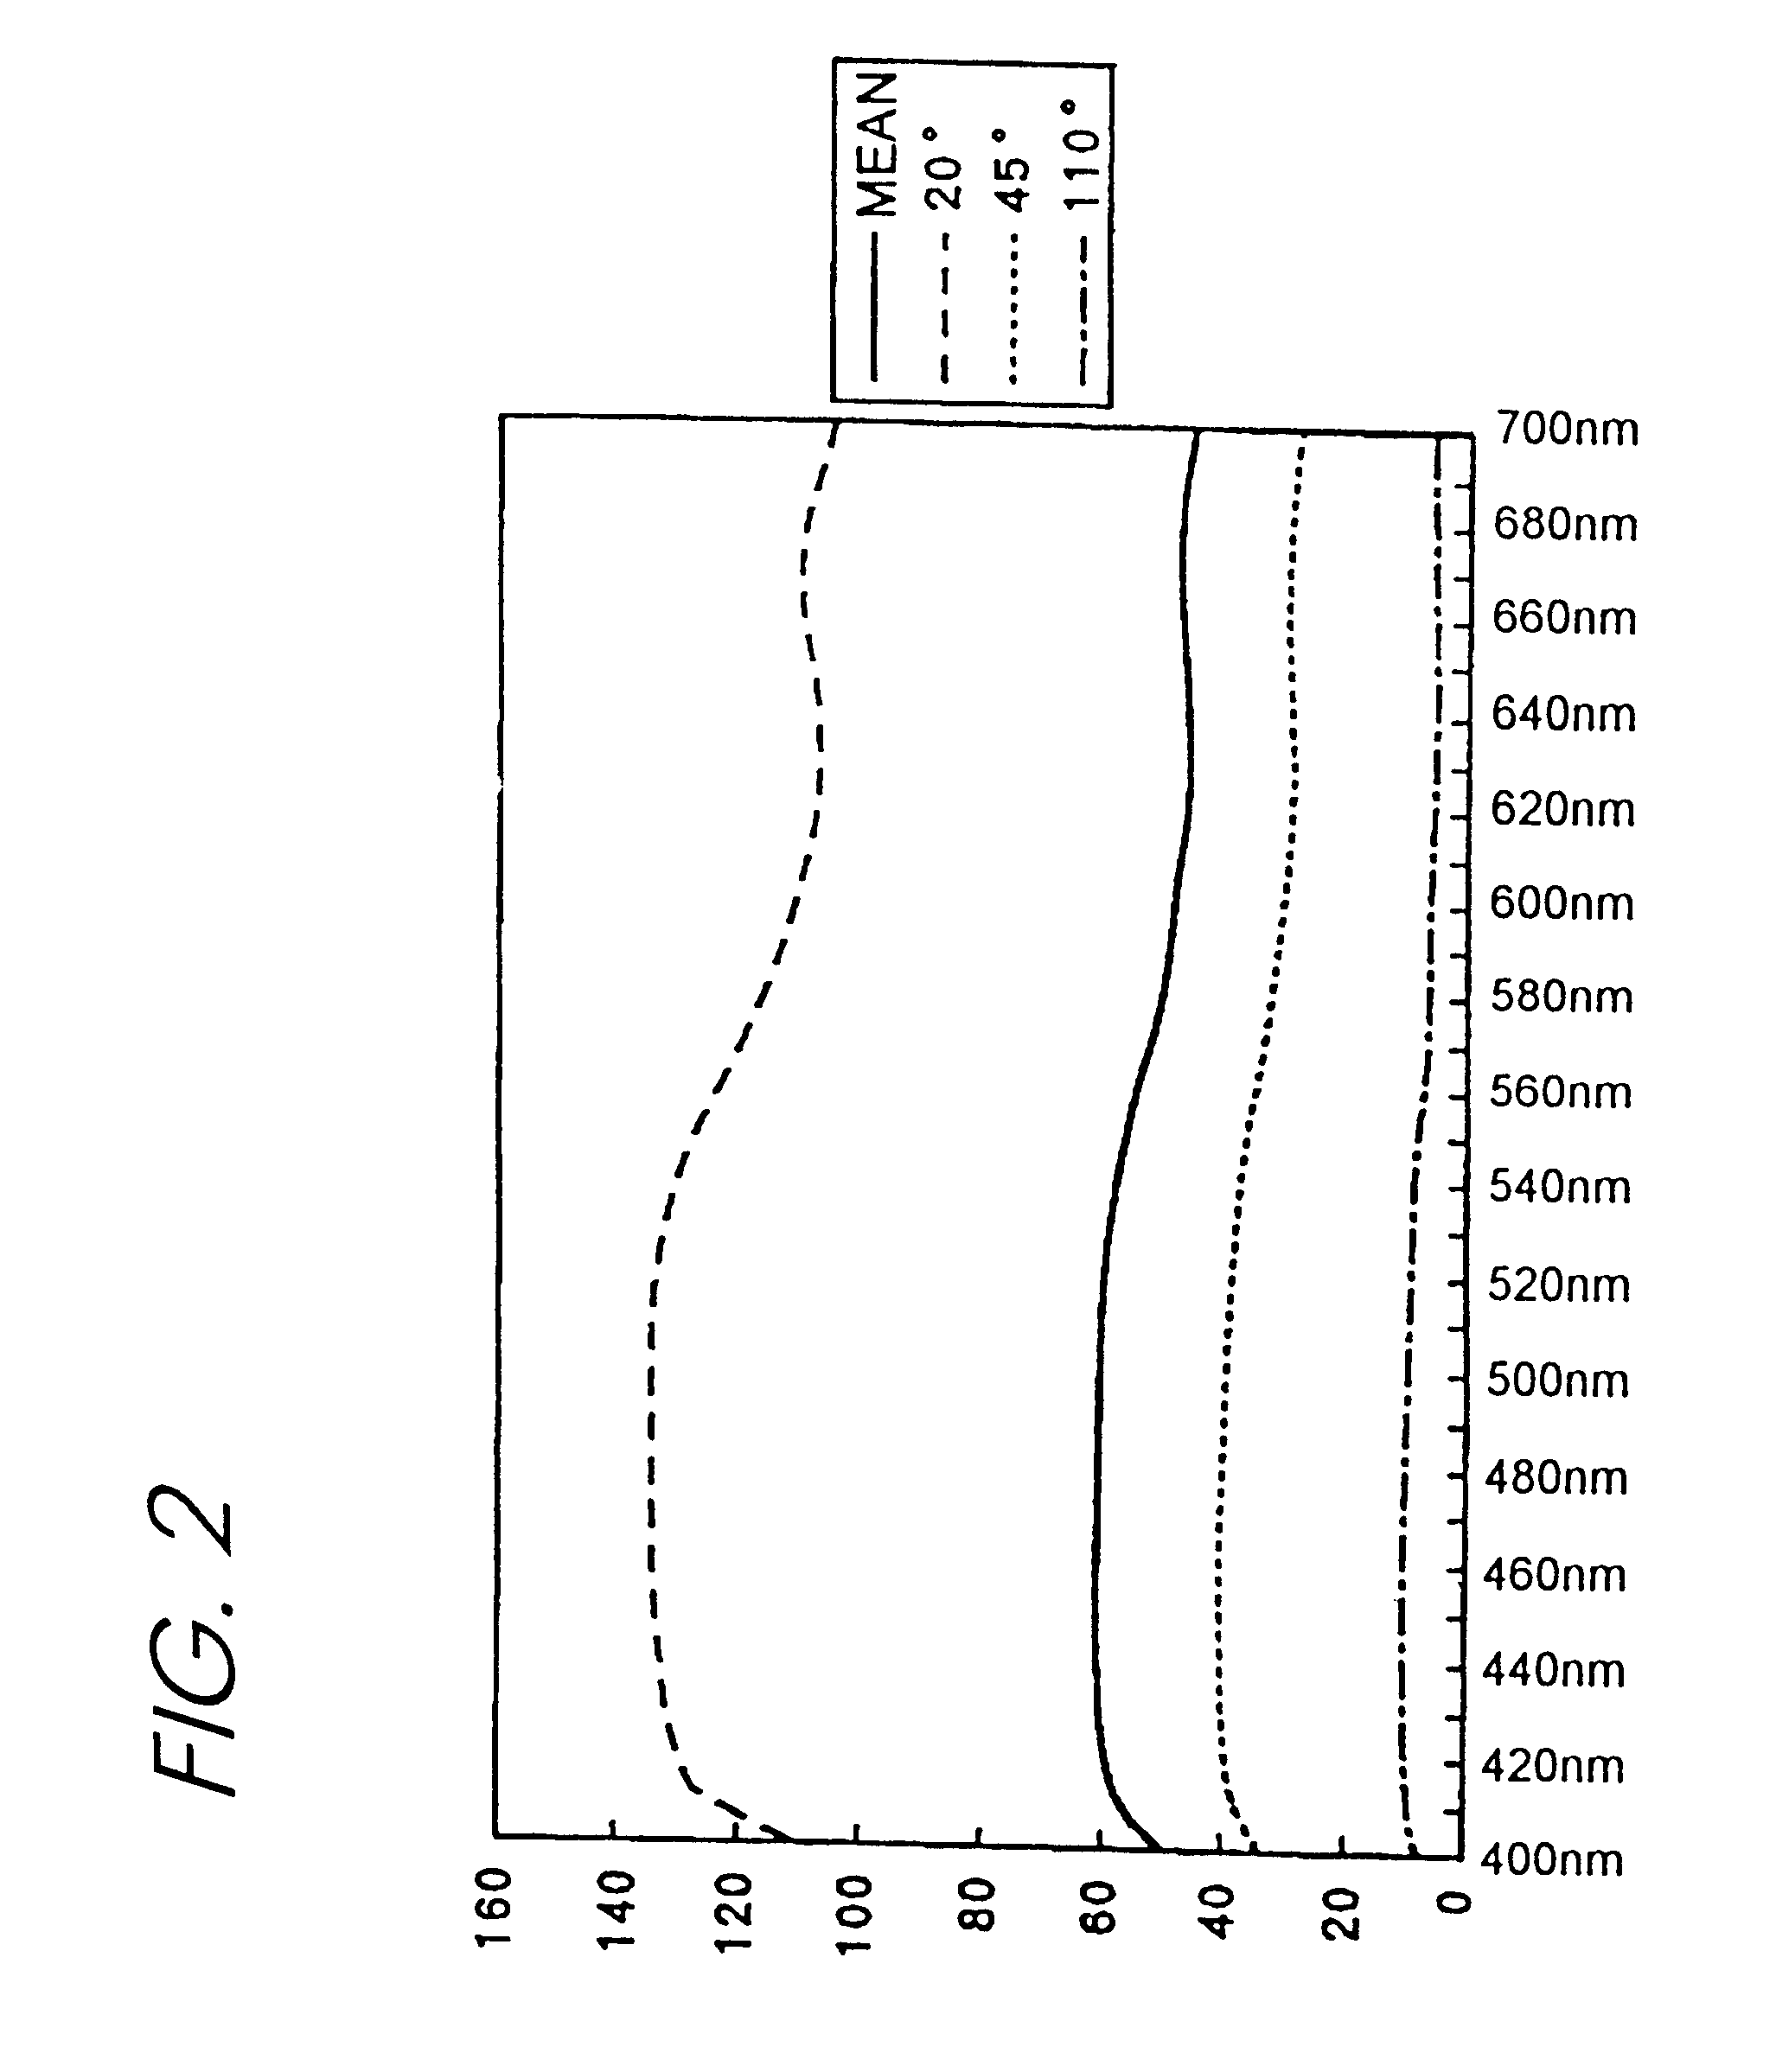 Method of determining the formulating ratio of a metallic or pearlescent pigment to a colorant or the formulating amount of a metallic or pearlescent pigment in the computer-aided color matching of a metallic or pearlescent paint